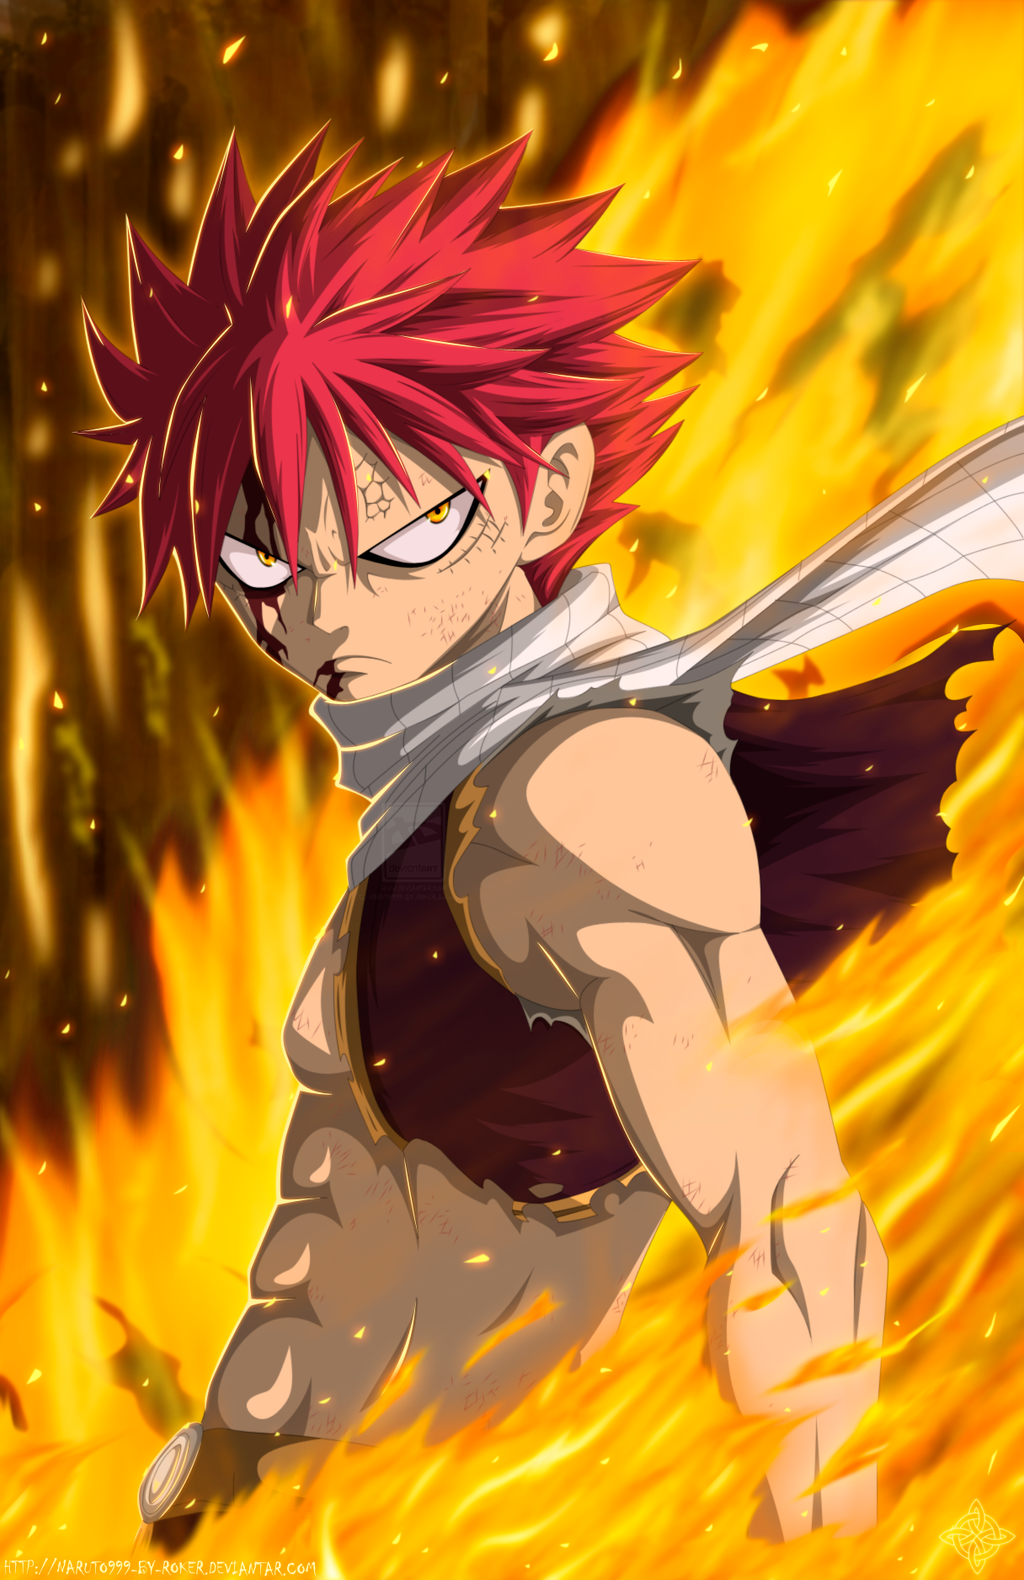 __natsu_dragon_force___by_naruto999_by_roker-d5l10c5.png